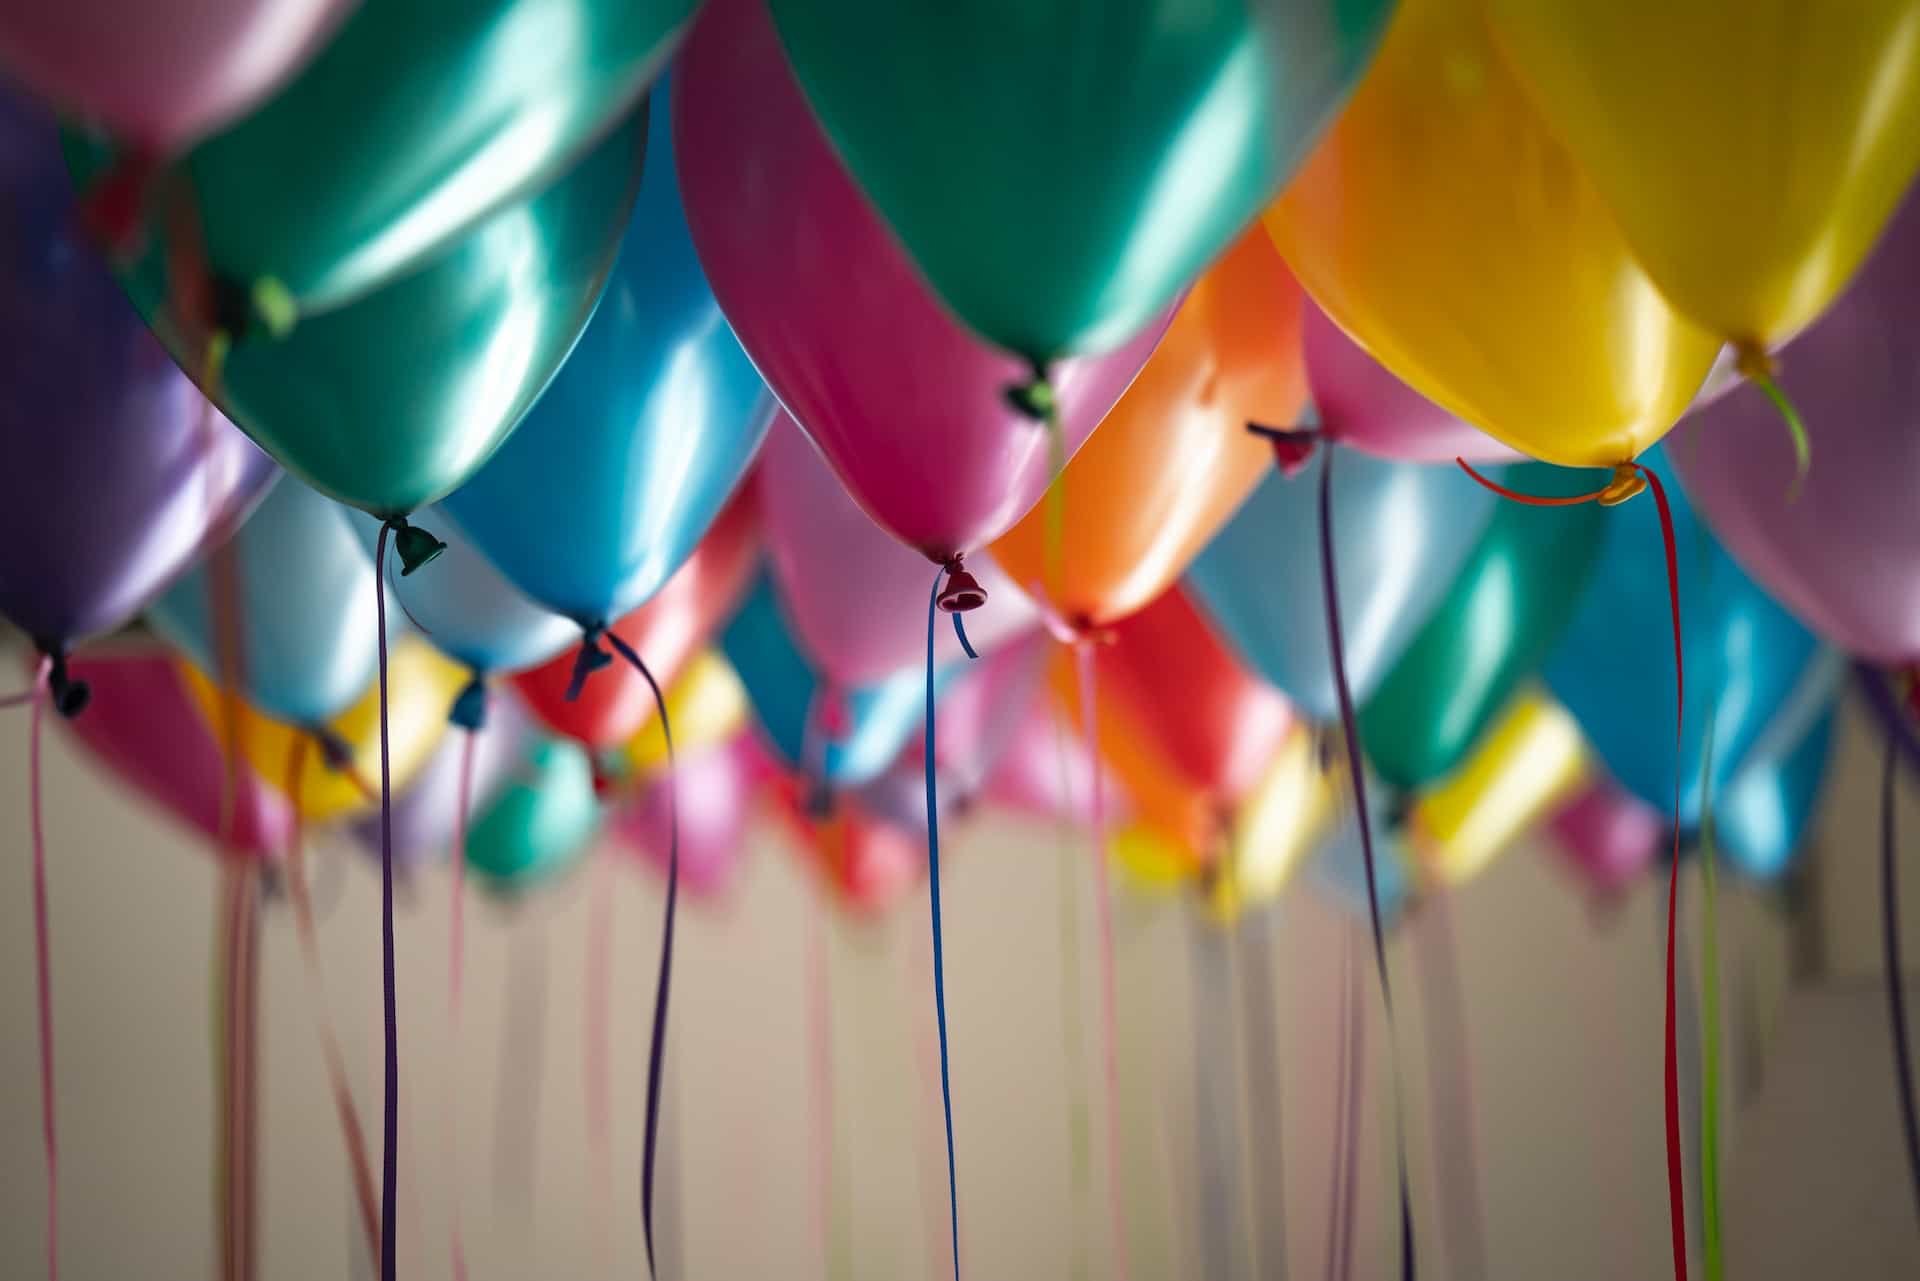 Colorful balloons attached to strings.